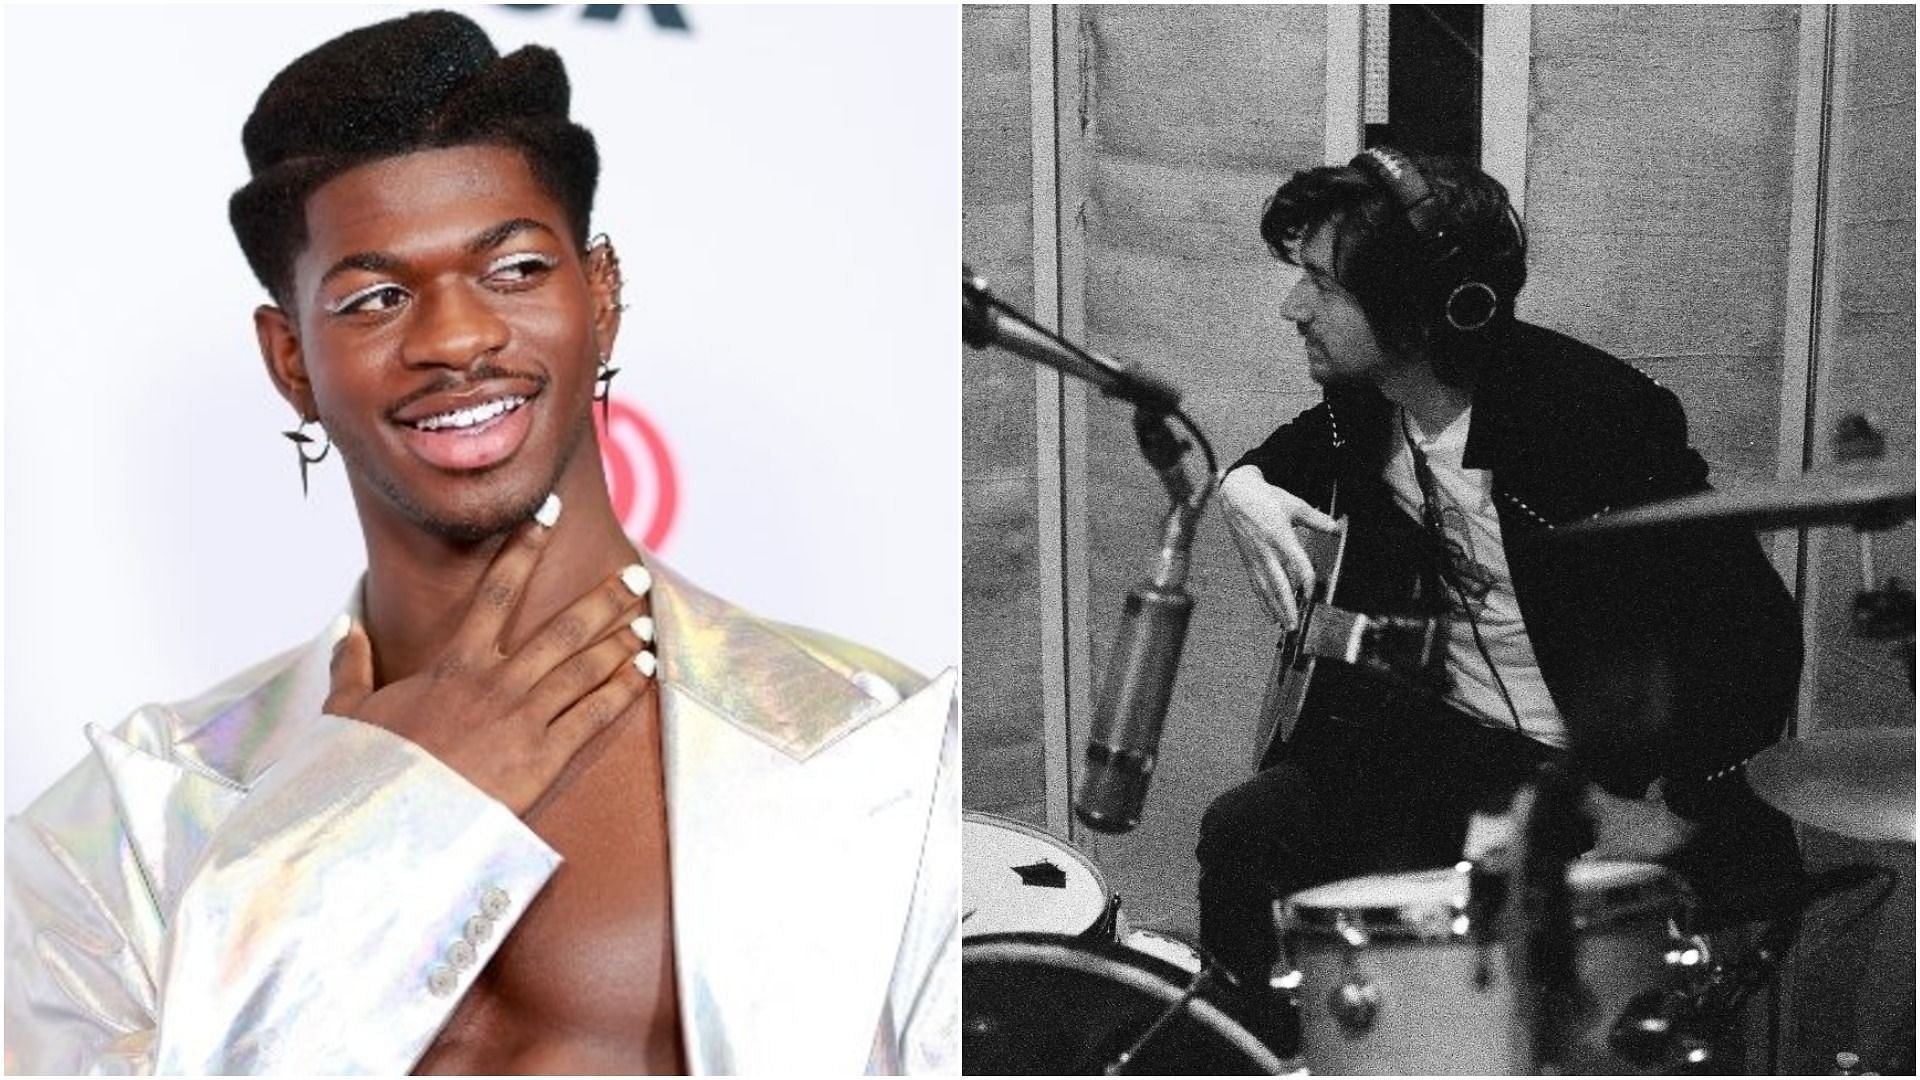 Lil Nas X and Arctic Monkeys will be one of the key performers at Falls festival 2022 (Image via Getty Images and @ArcticMonkeys/Twitter)